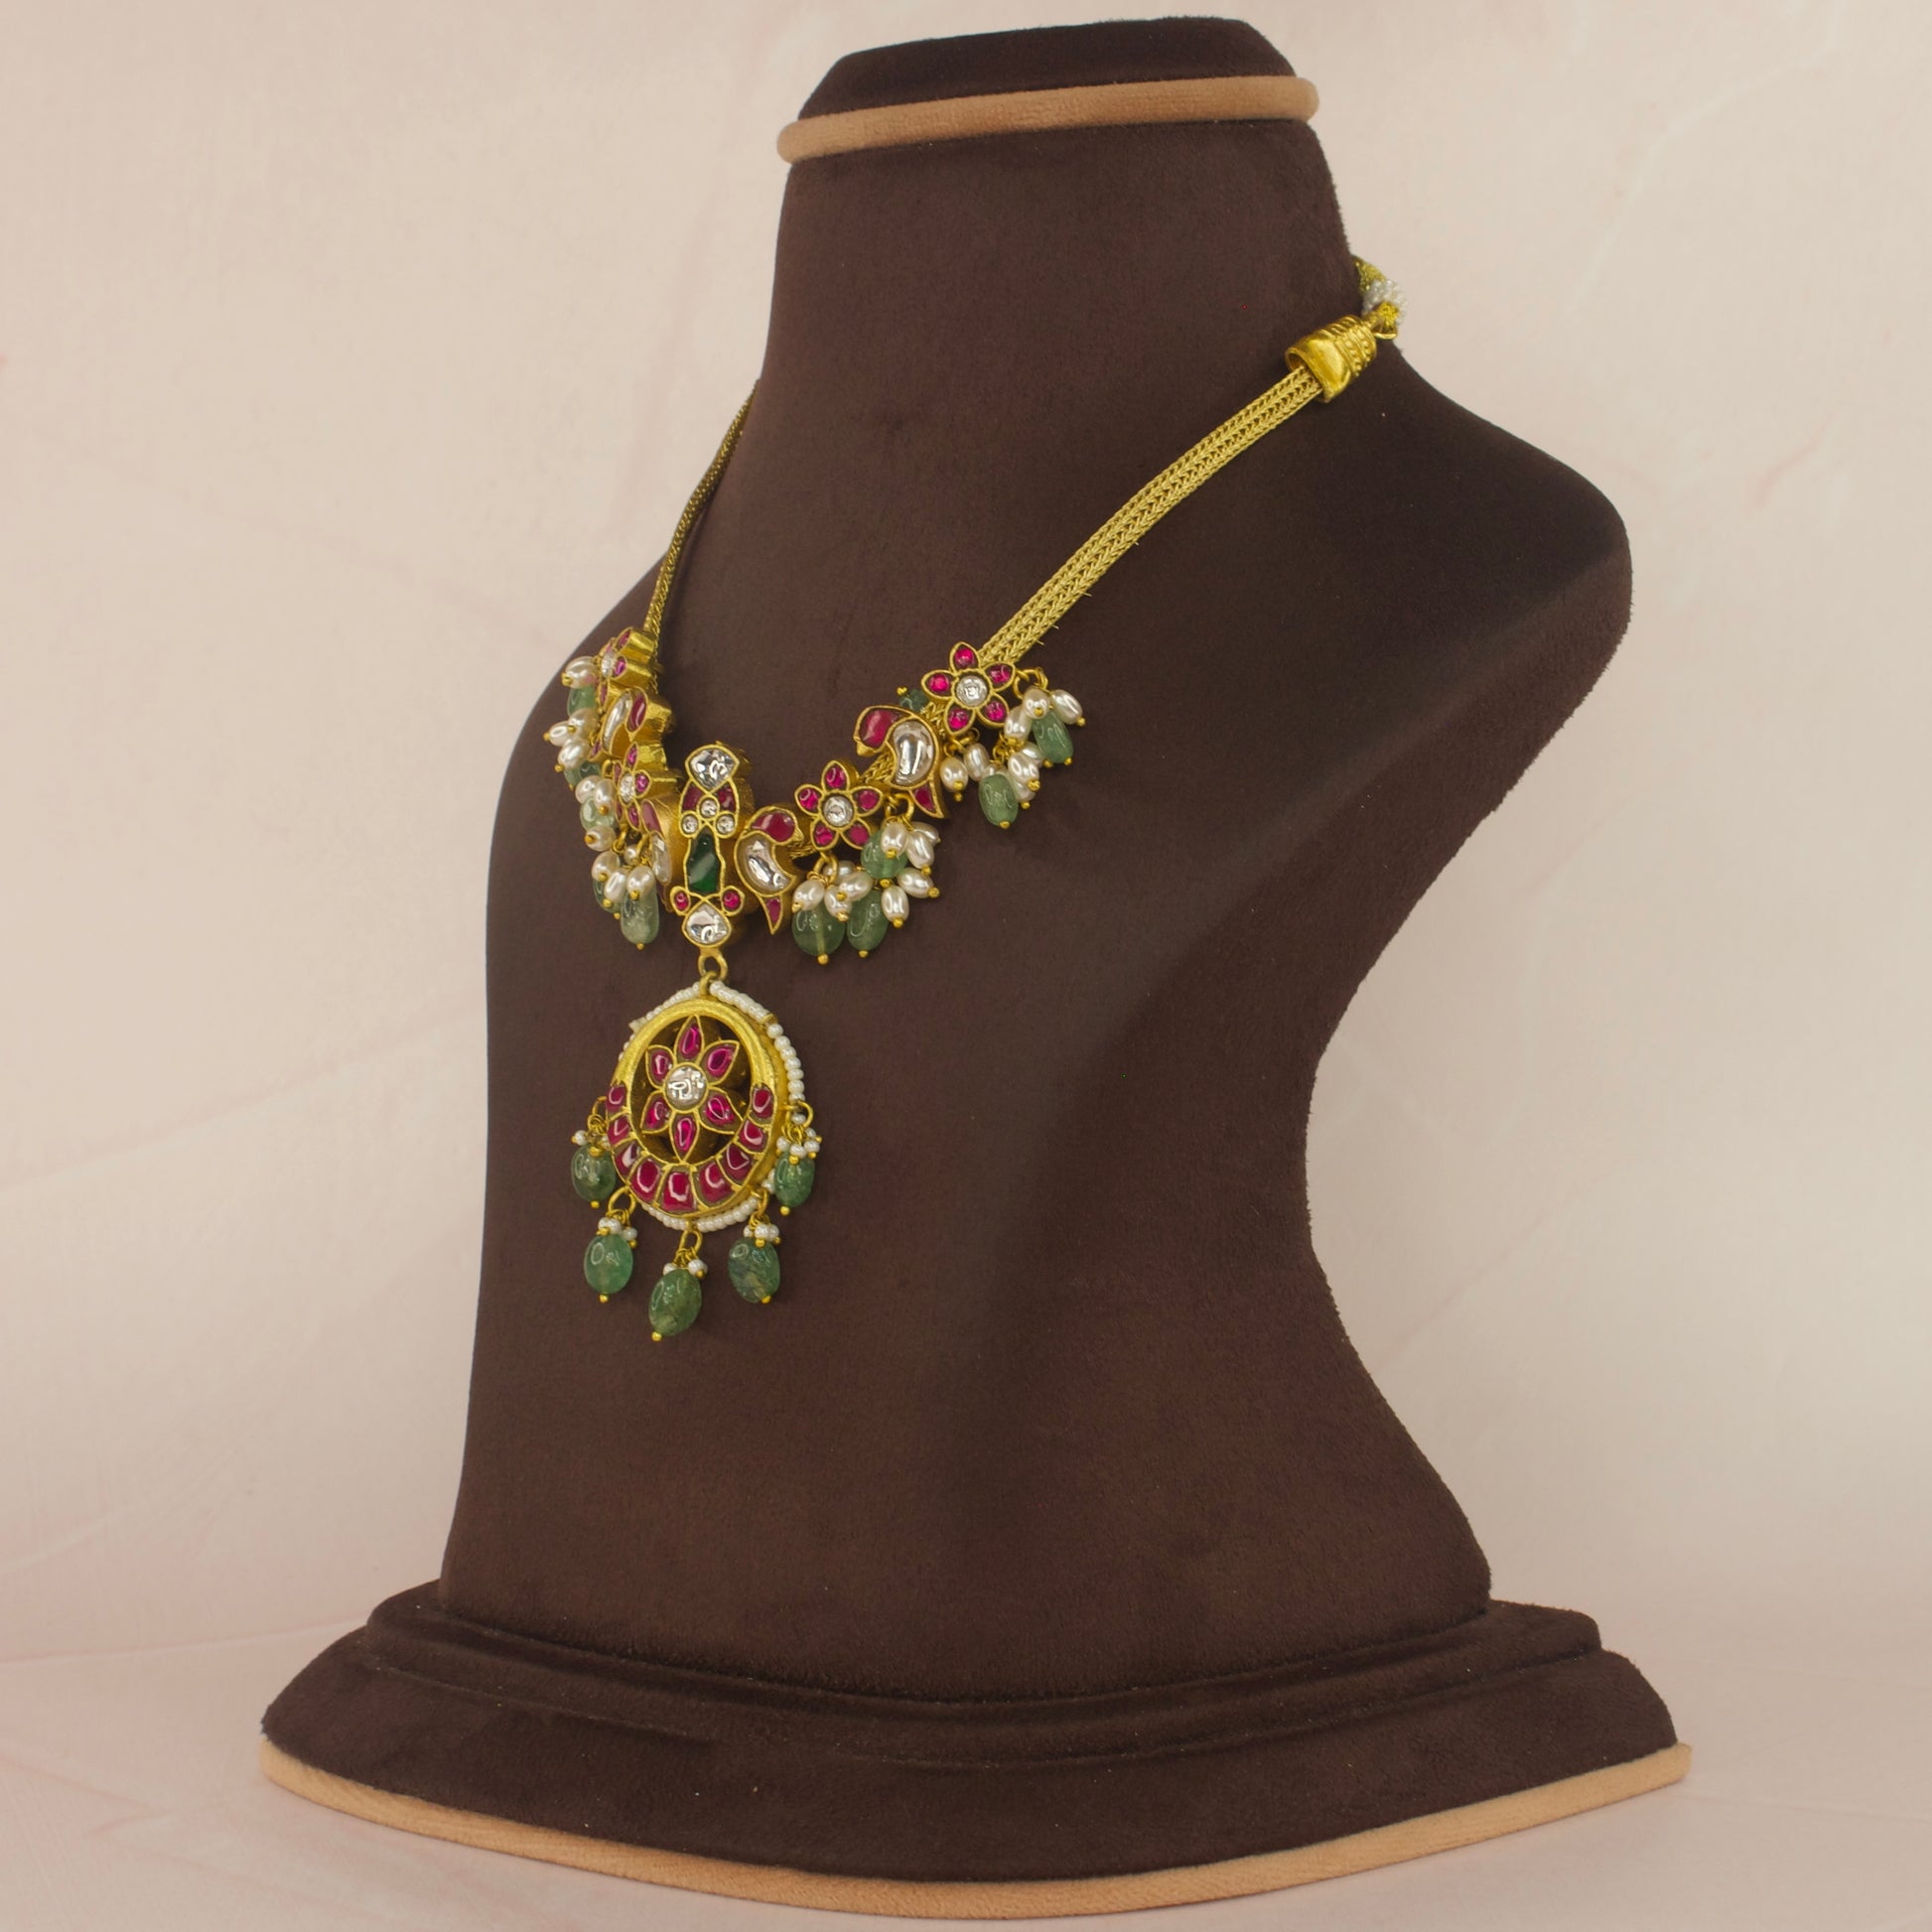 Elegant Floral Jadau Kundan Necklace with Green Beads and Pearl Accents with 22k gold plating. This Product Belongs to Jadau Kundan Jewellery Category